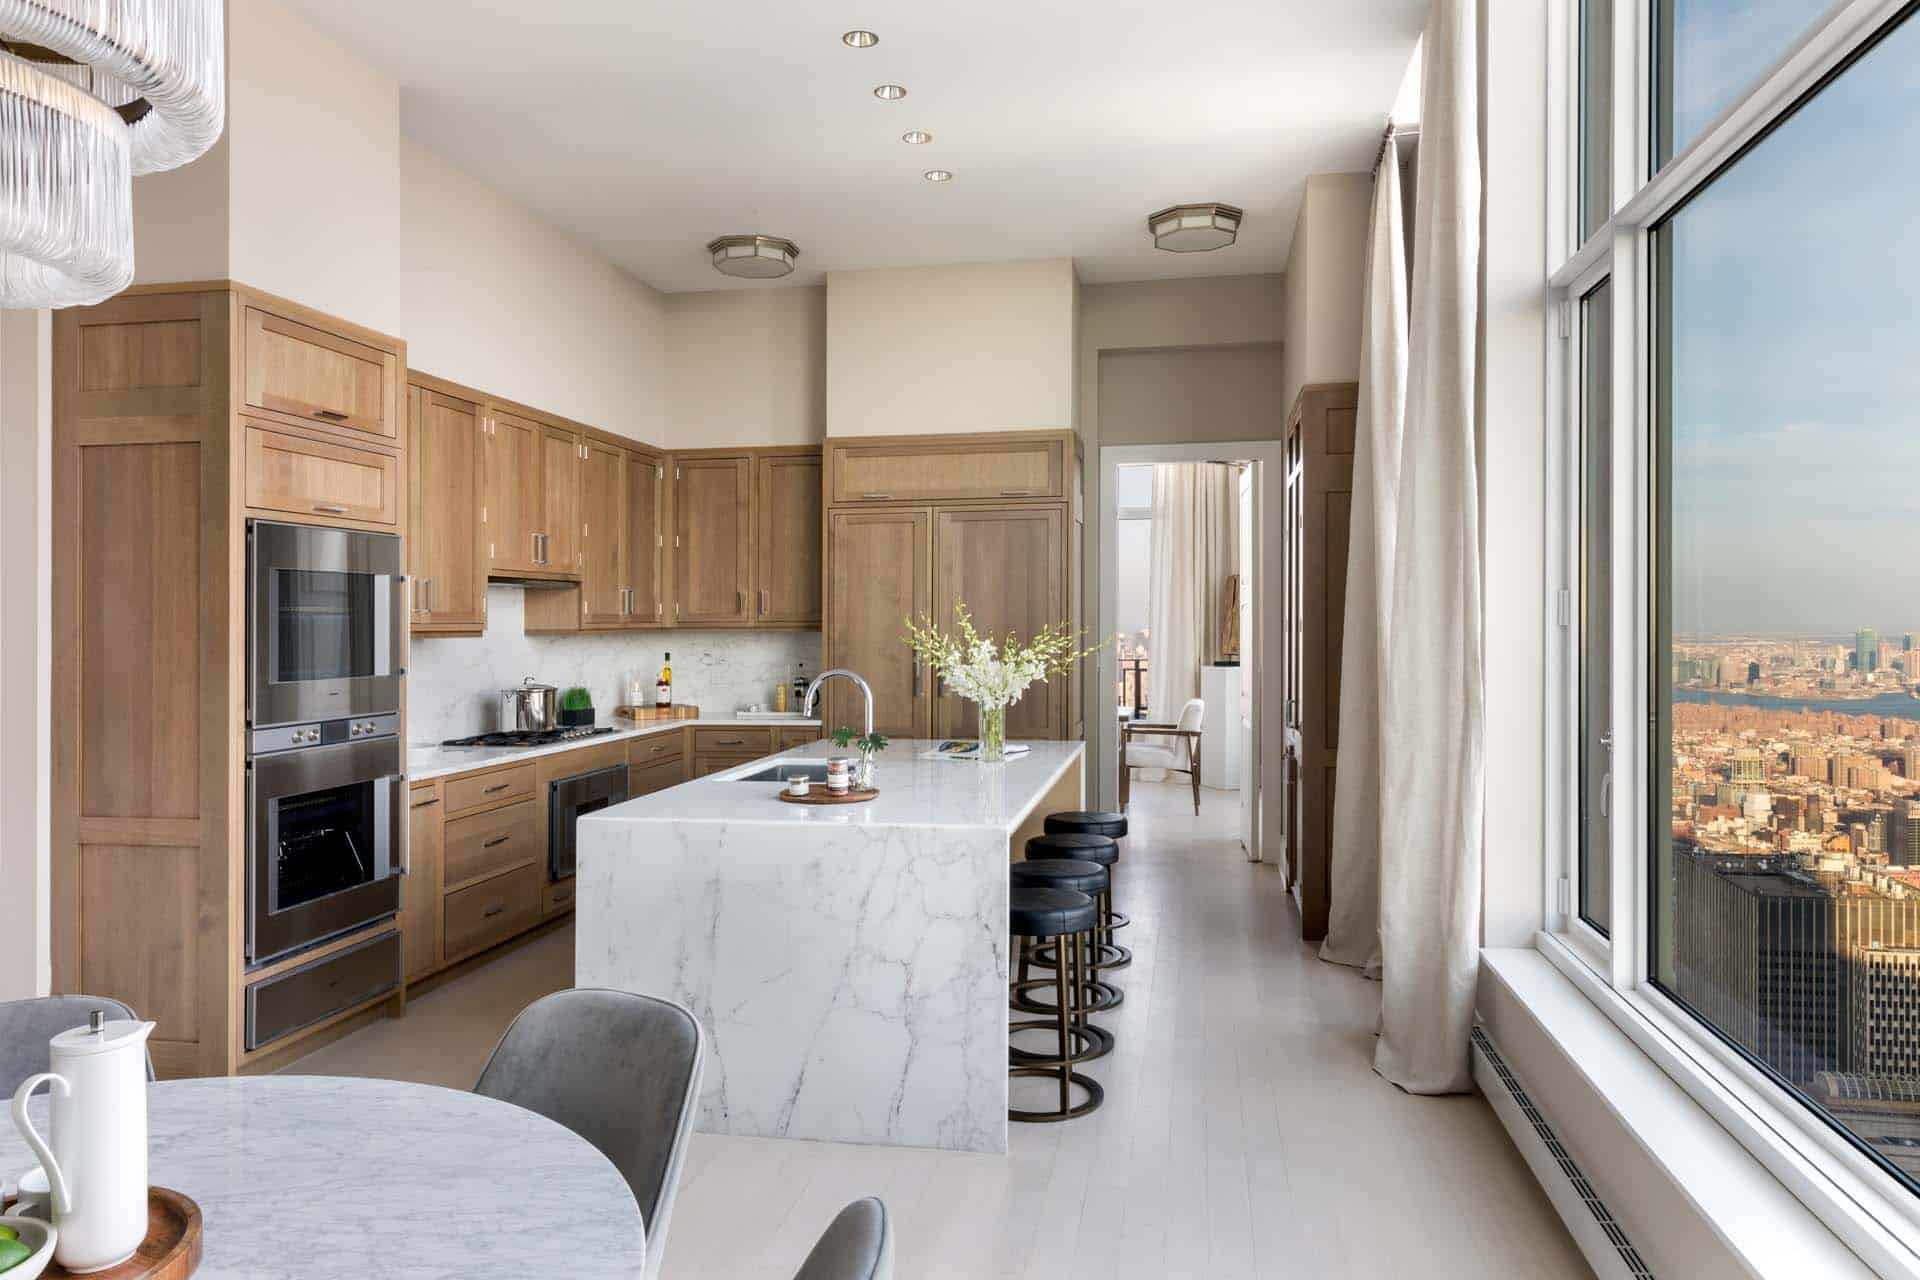 New York City penthouse kitchen features Bilotta Collection cabinets in rift cut white oak and island with marble waterfall countertop.